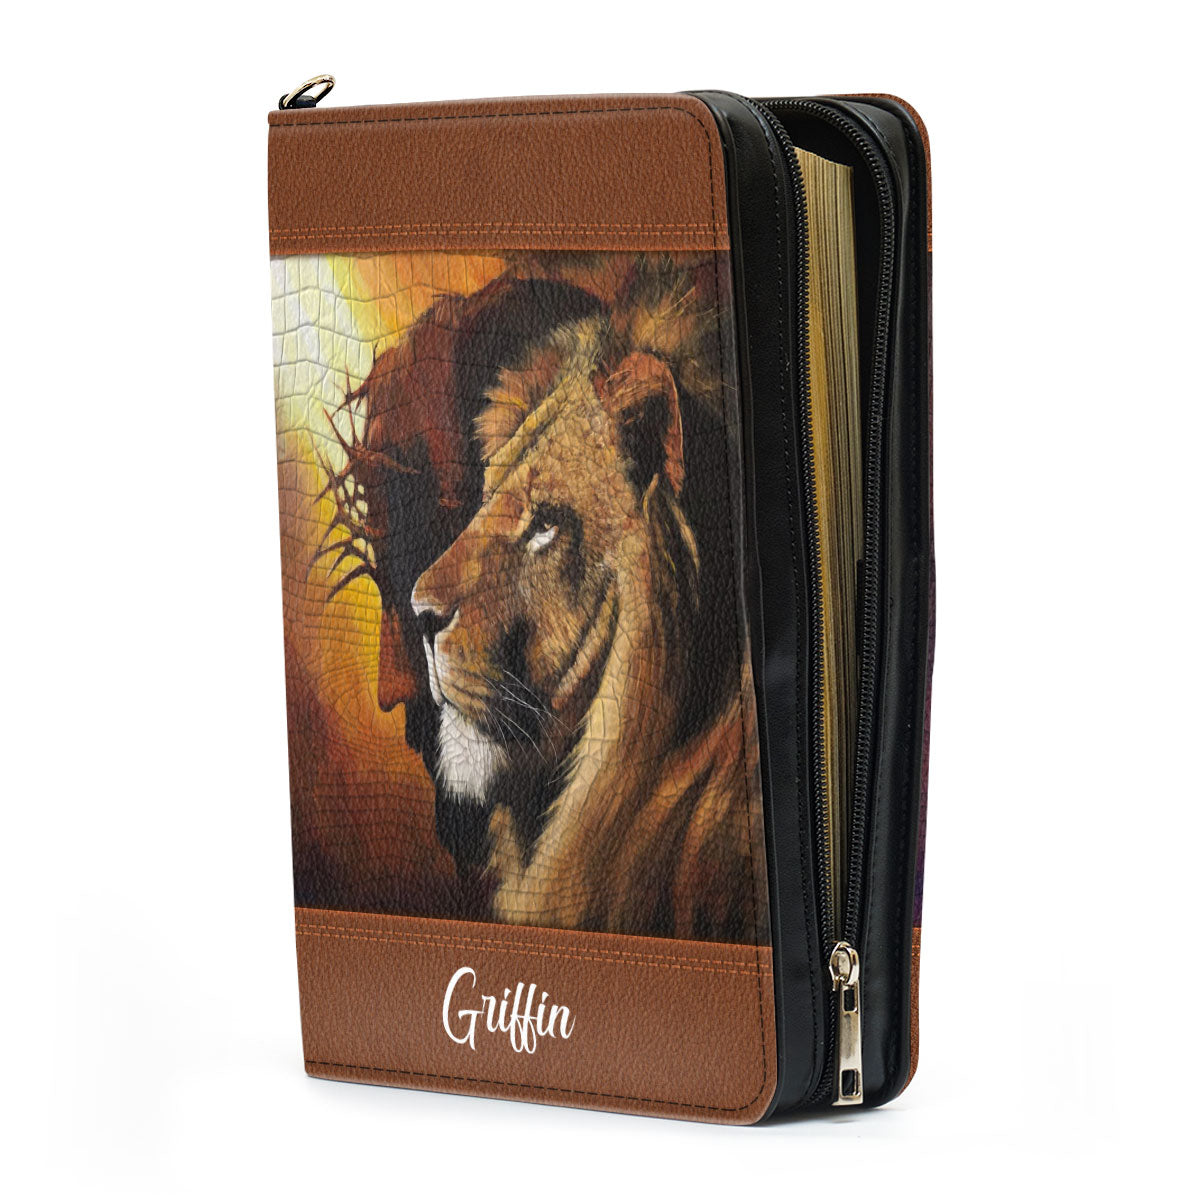 Personalized Christian Bible Cover - There Is Power In The Name Of Jesus H16